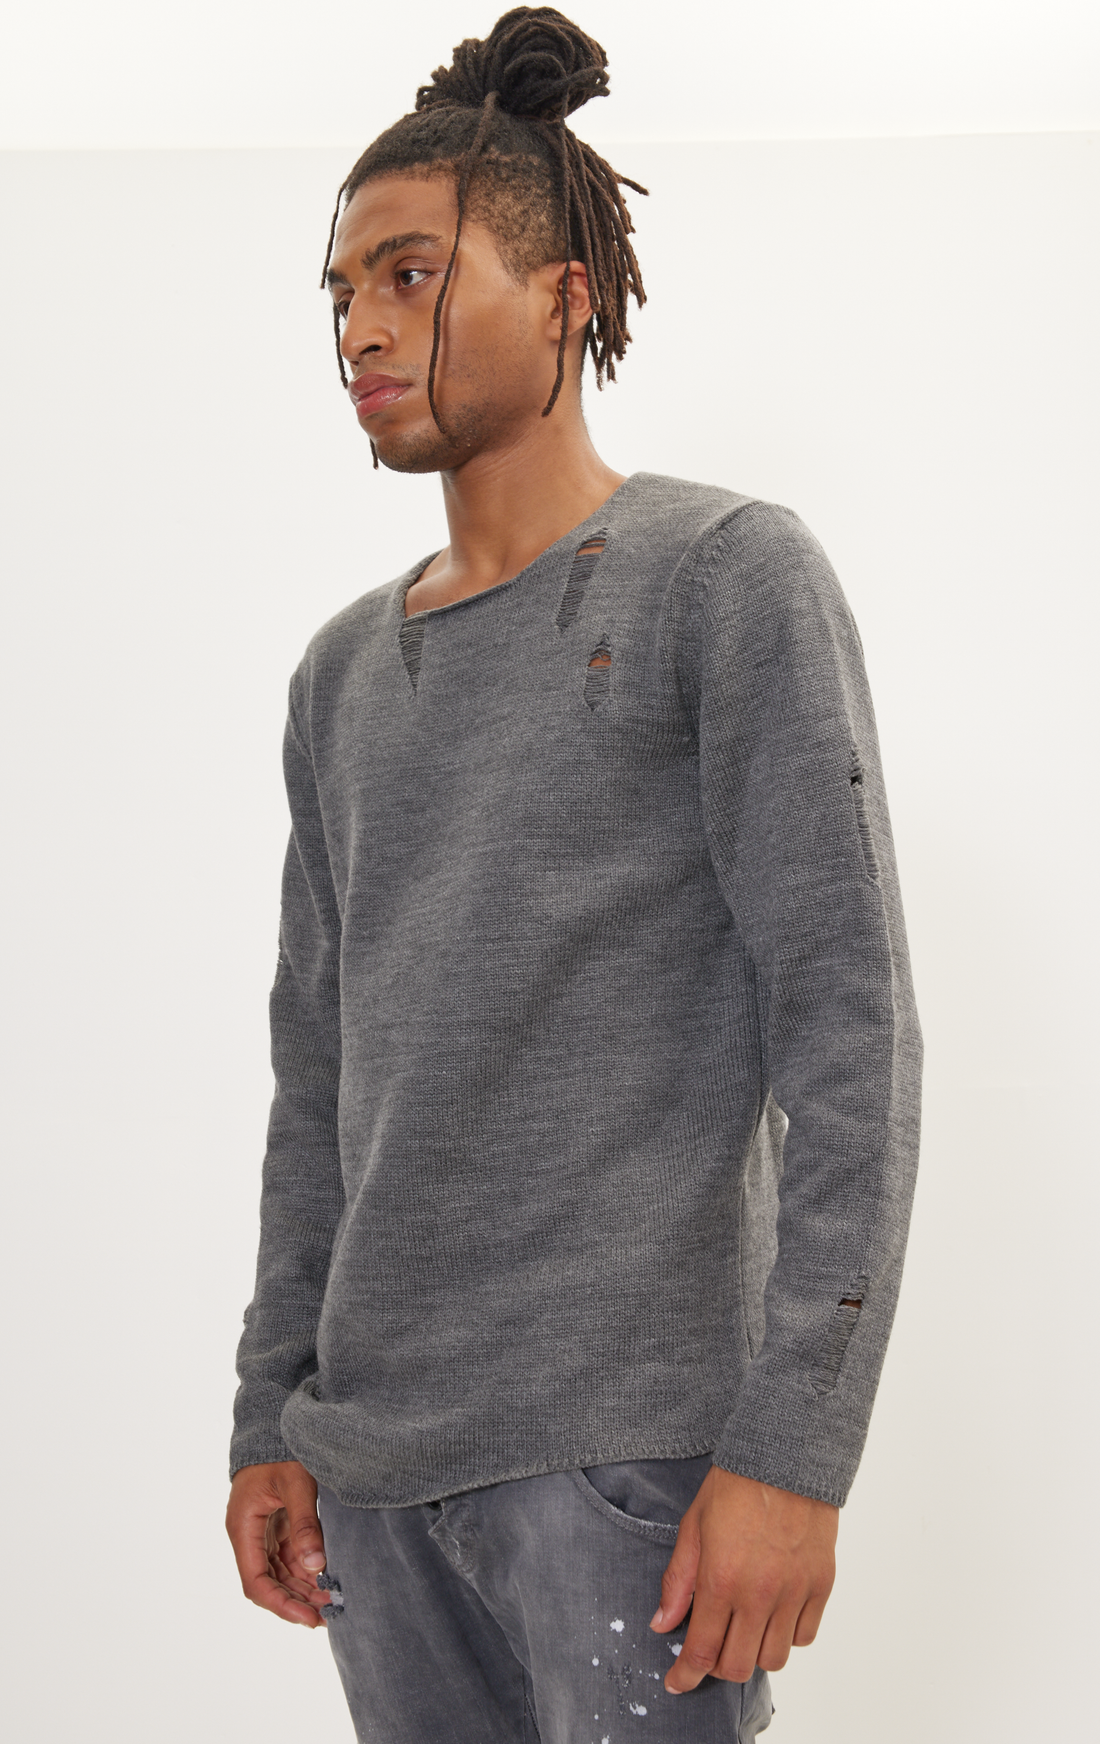 Distorted Anthracite Sweater